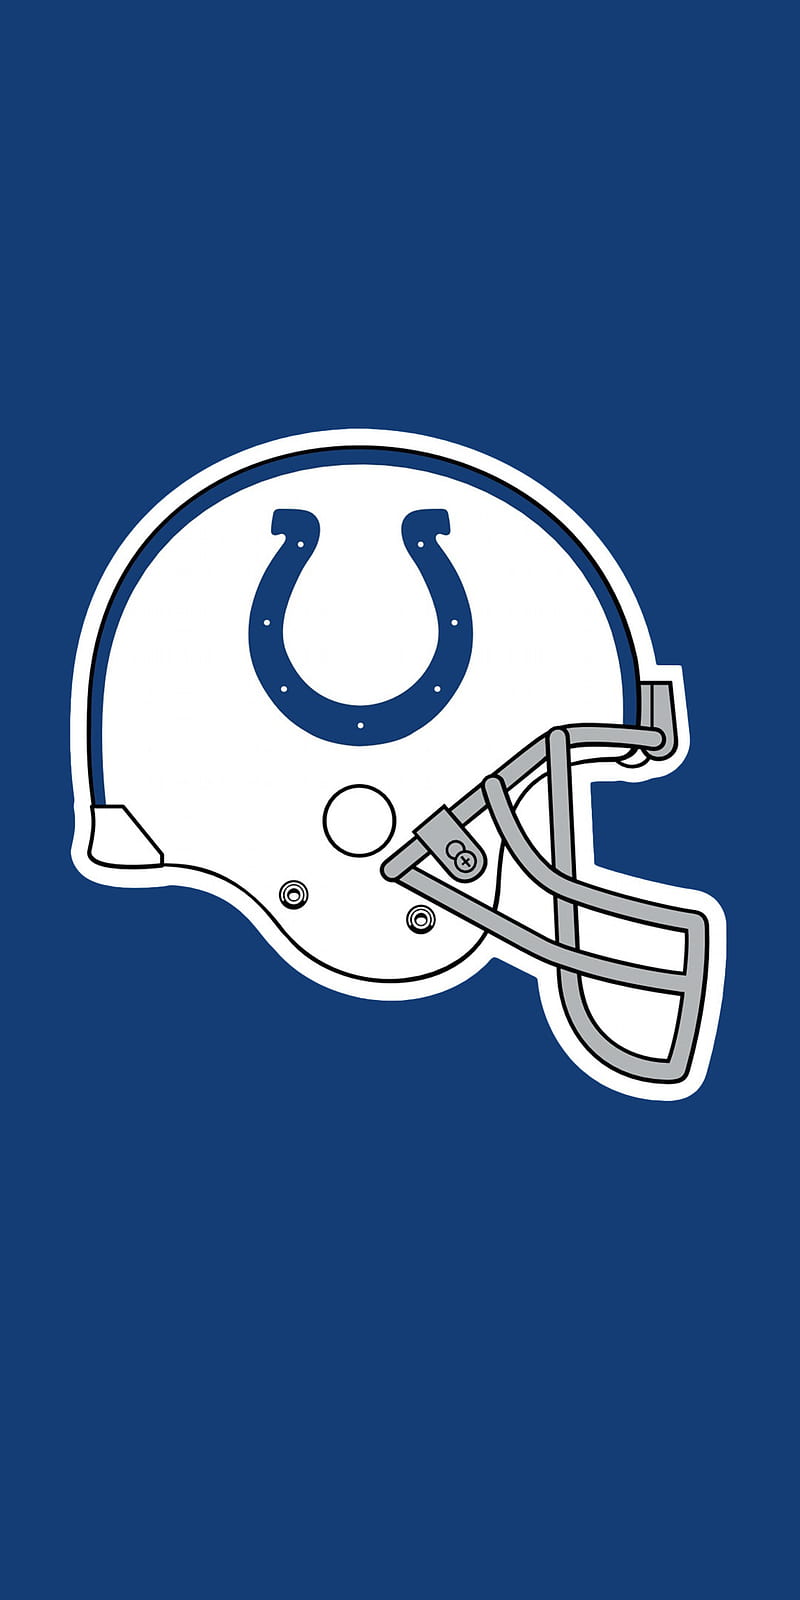 Colts Wallpapers (67+ images)